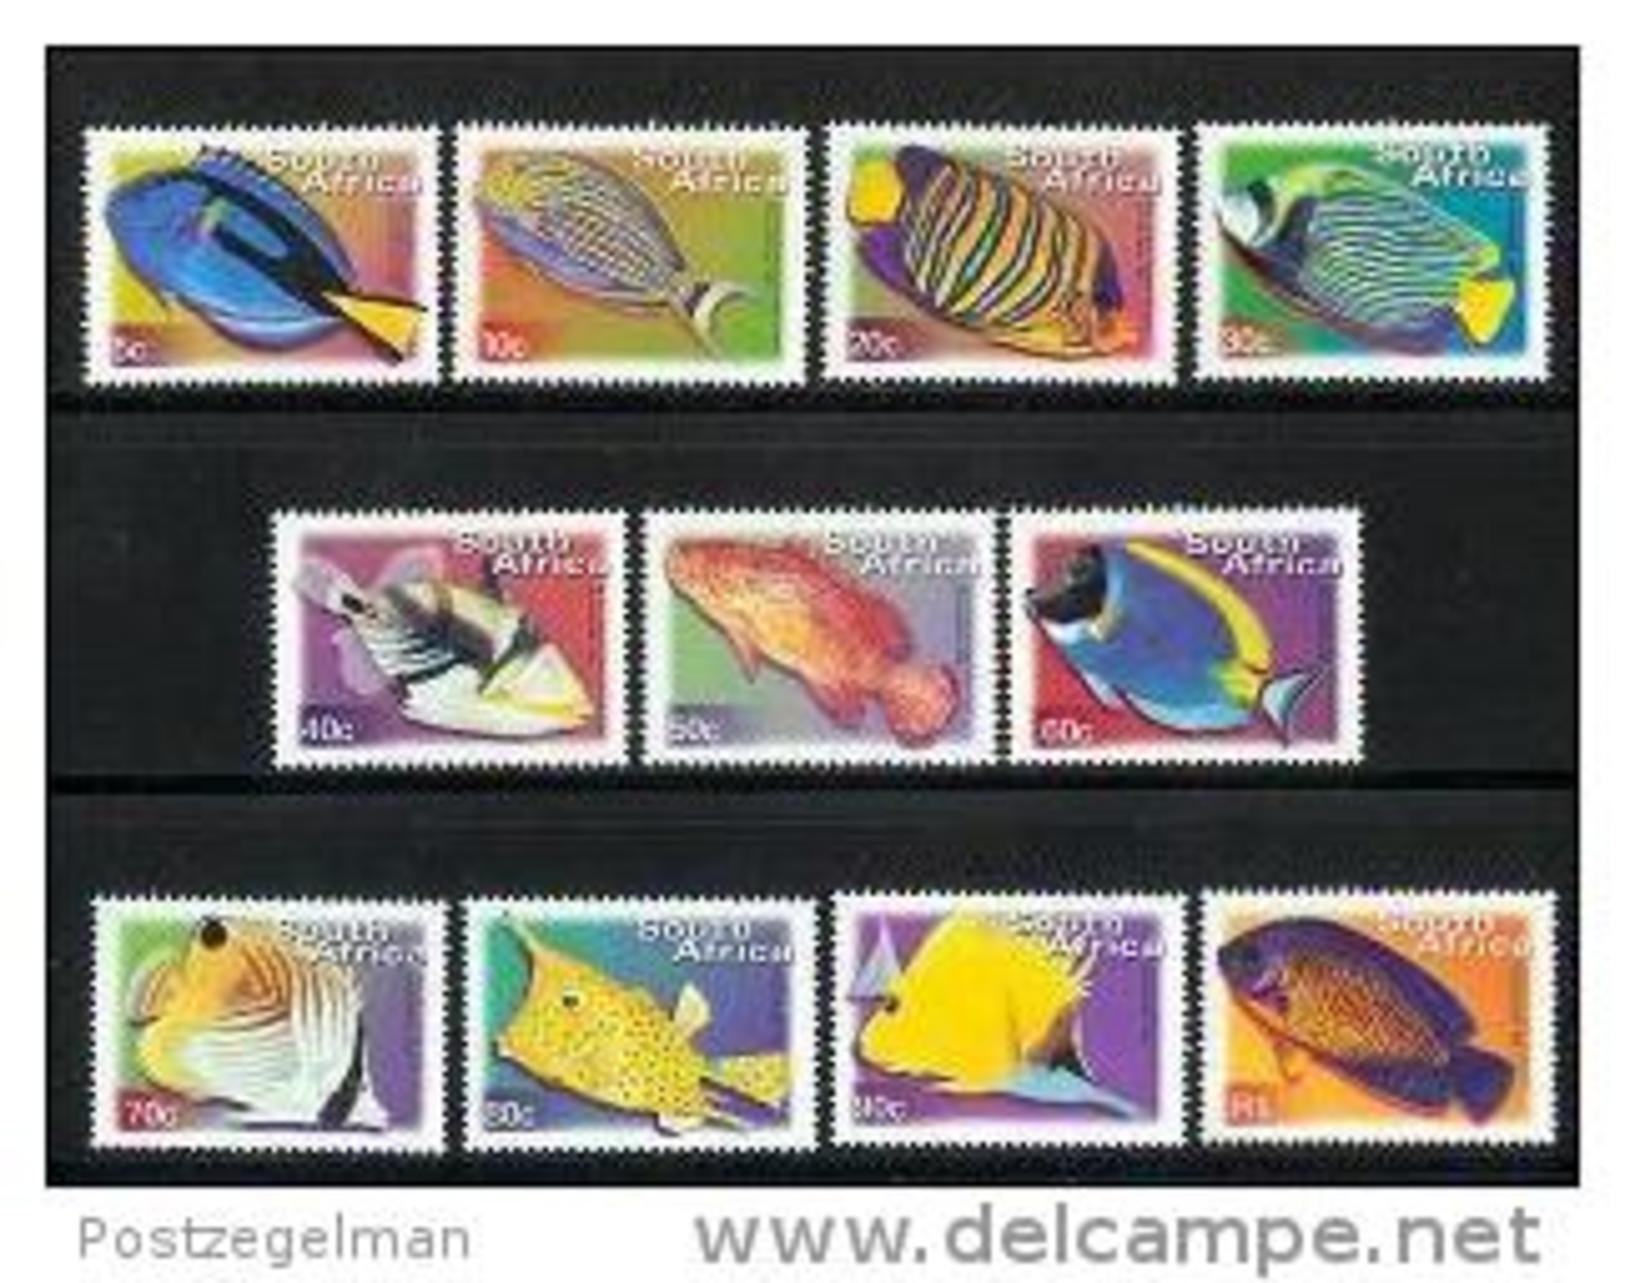 SOUTH AFRICA, 2001, Mint Never Hinged Stamp(s), Definitives Fishes (11 Stamps), Nr(s) 1285-1295 #6756-8 - Ungebraucht